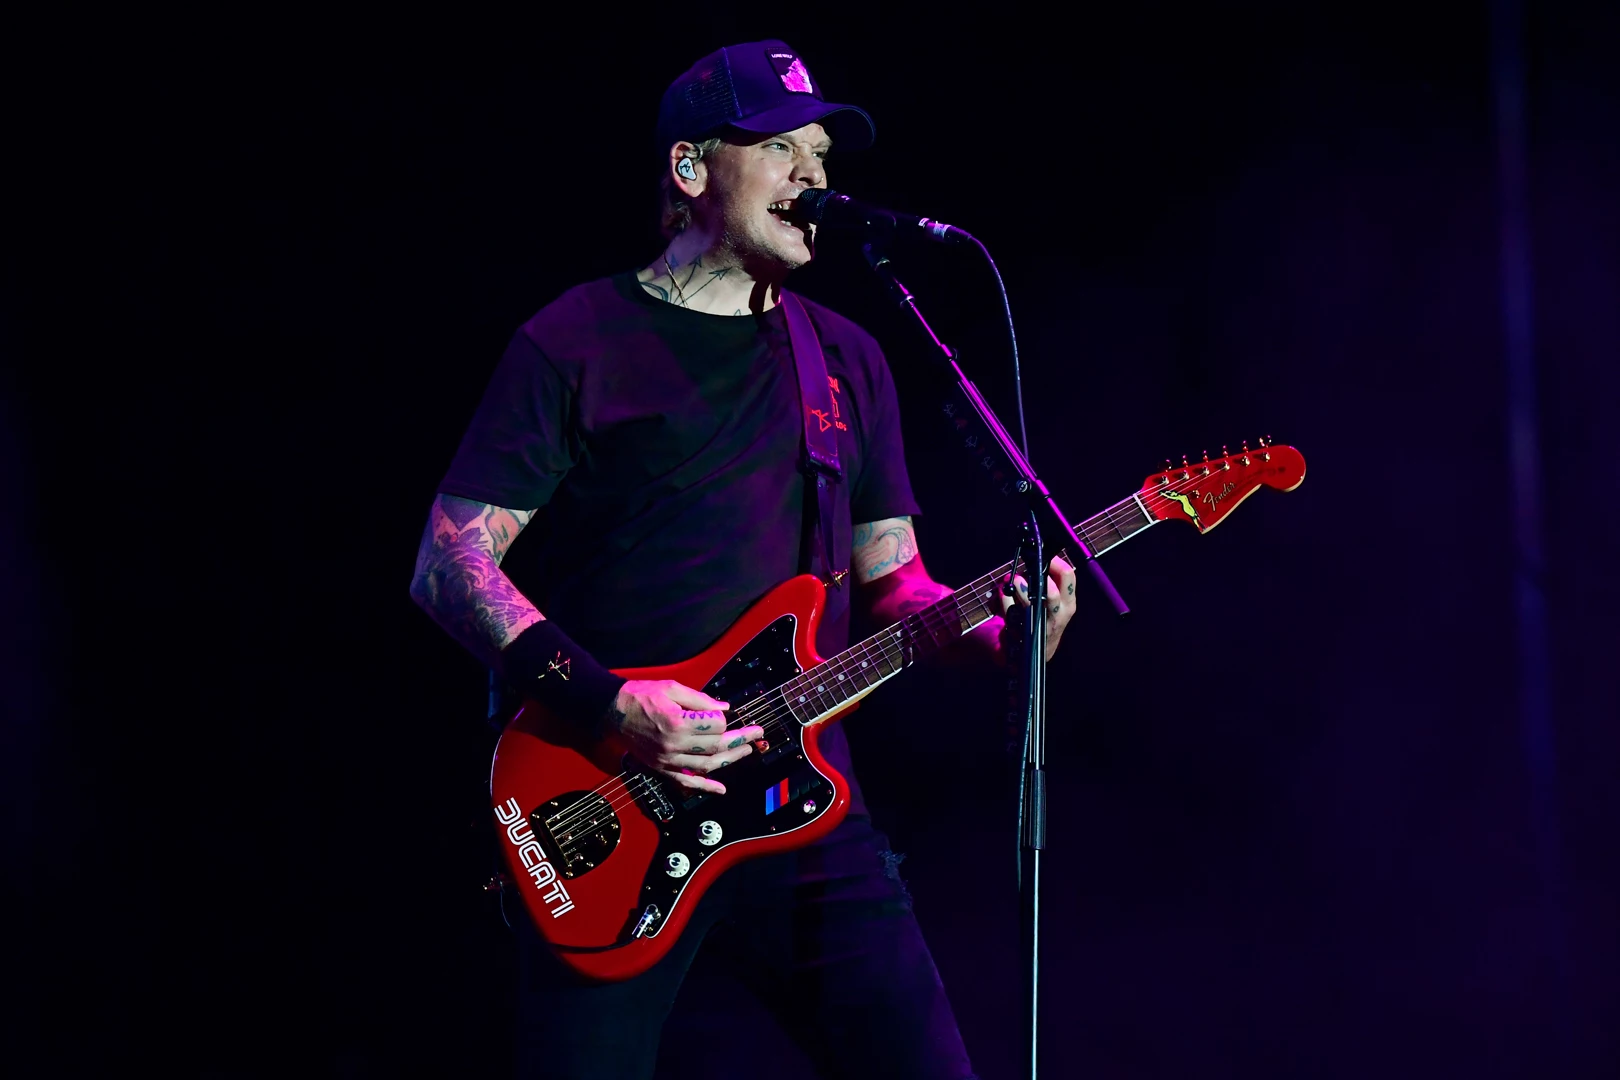 Skiba - Almost a Whole Album Was Written With Blink-182